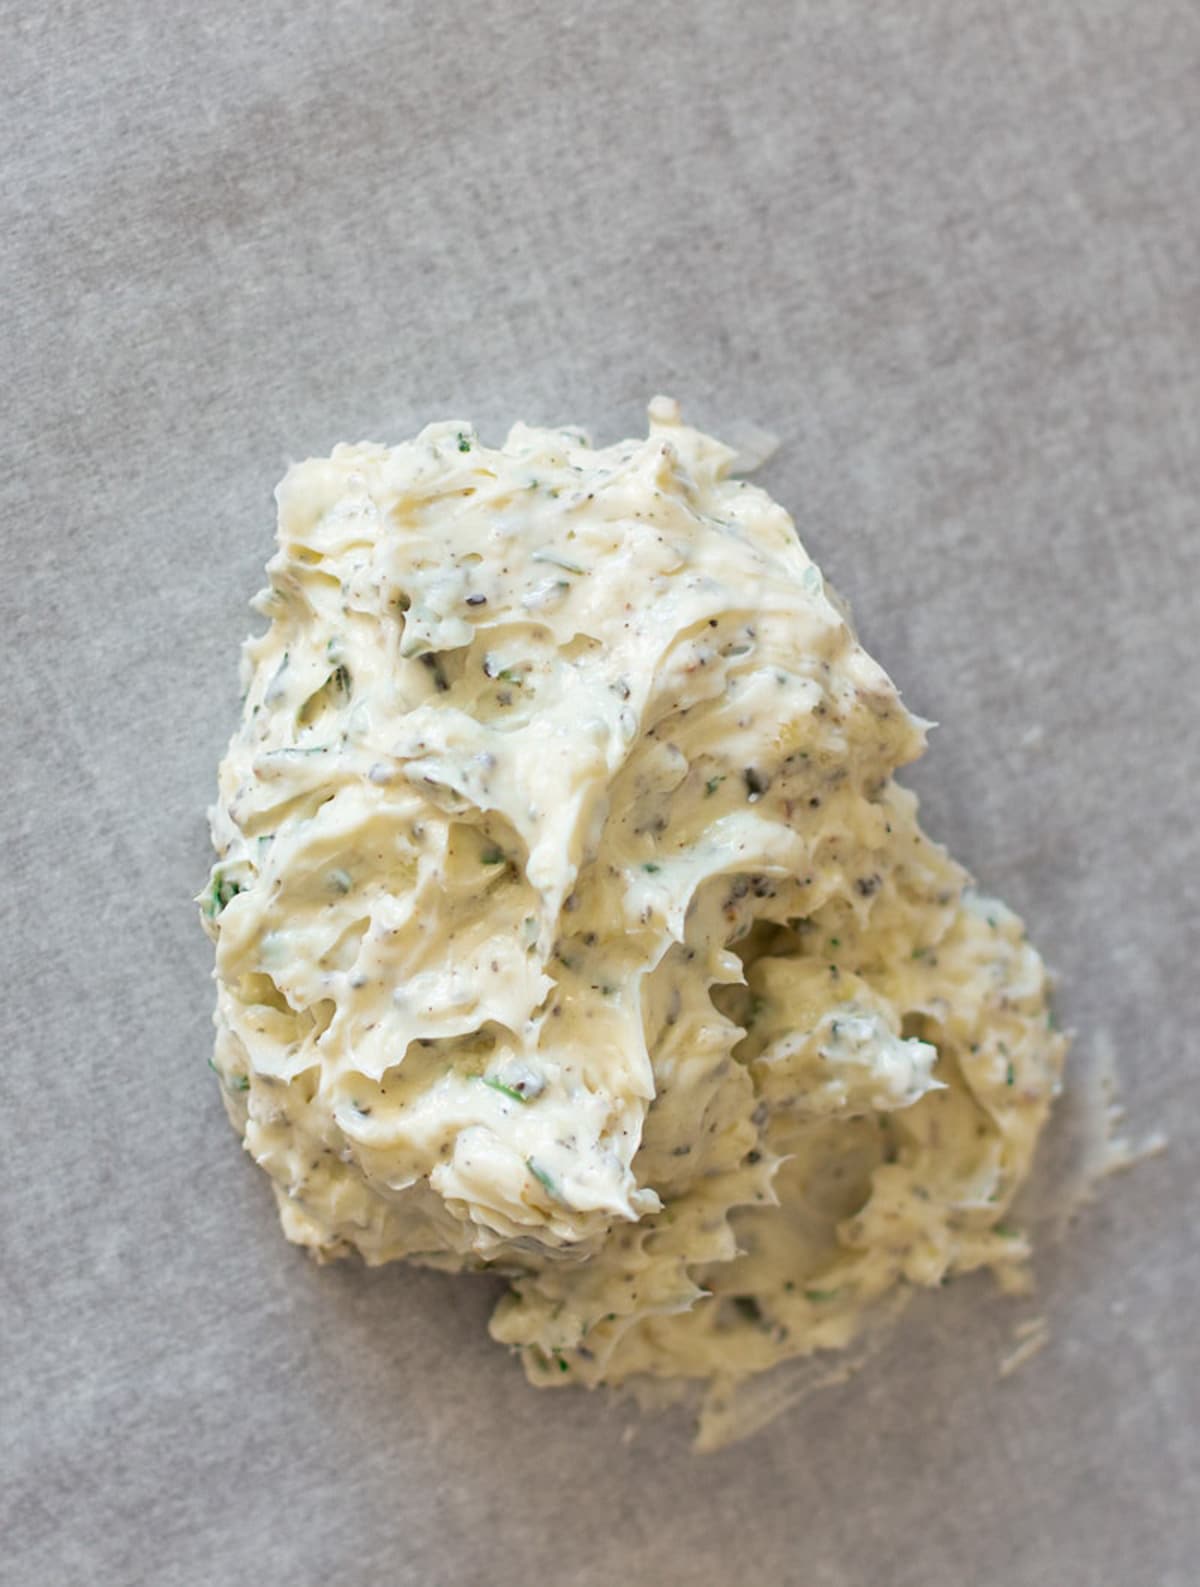 Dollop of herb compound butter on parchment paper.